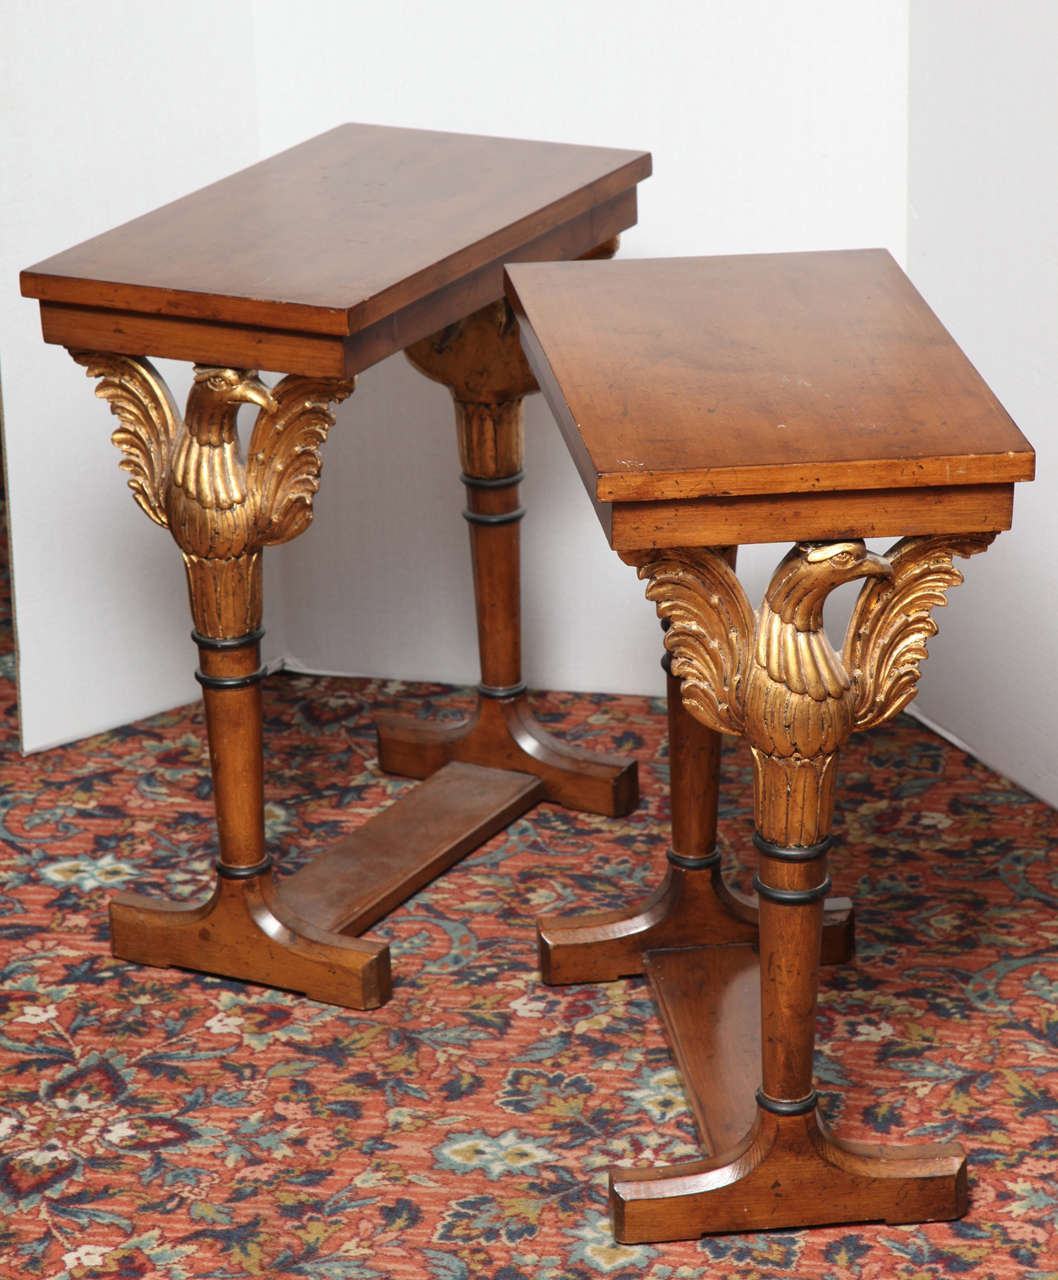 20th Century Pair of classical darkwood and giltwood side tables with eagles on side